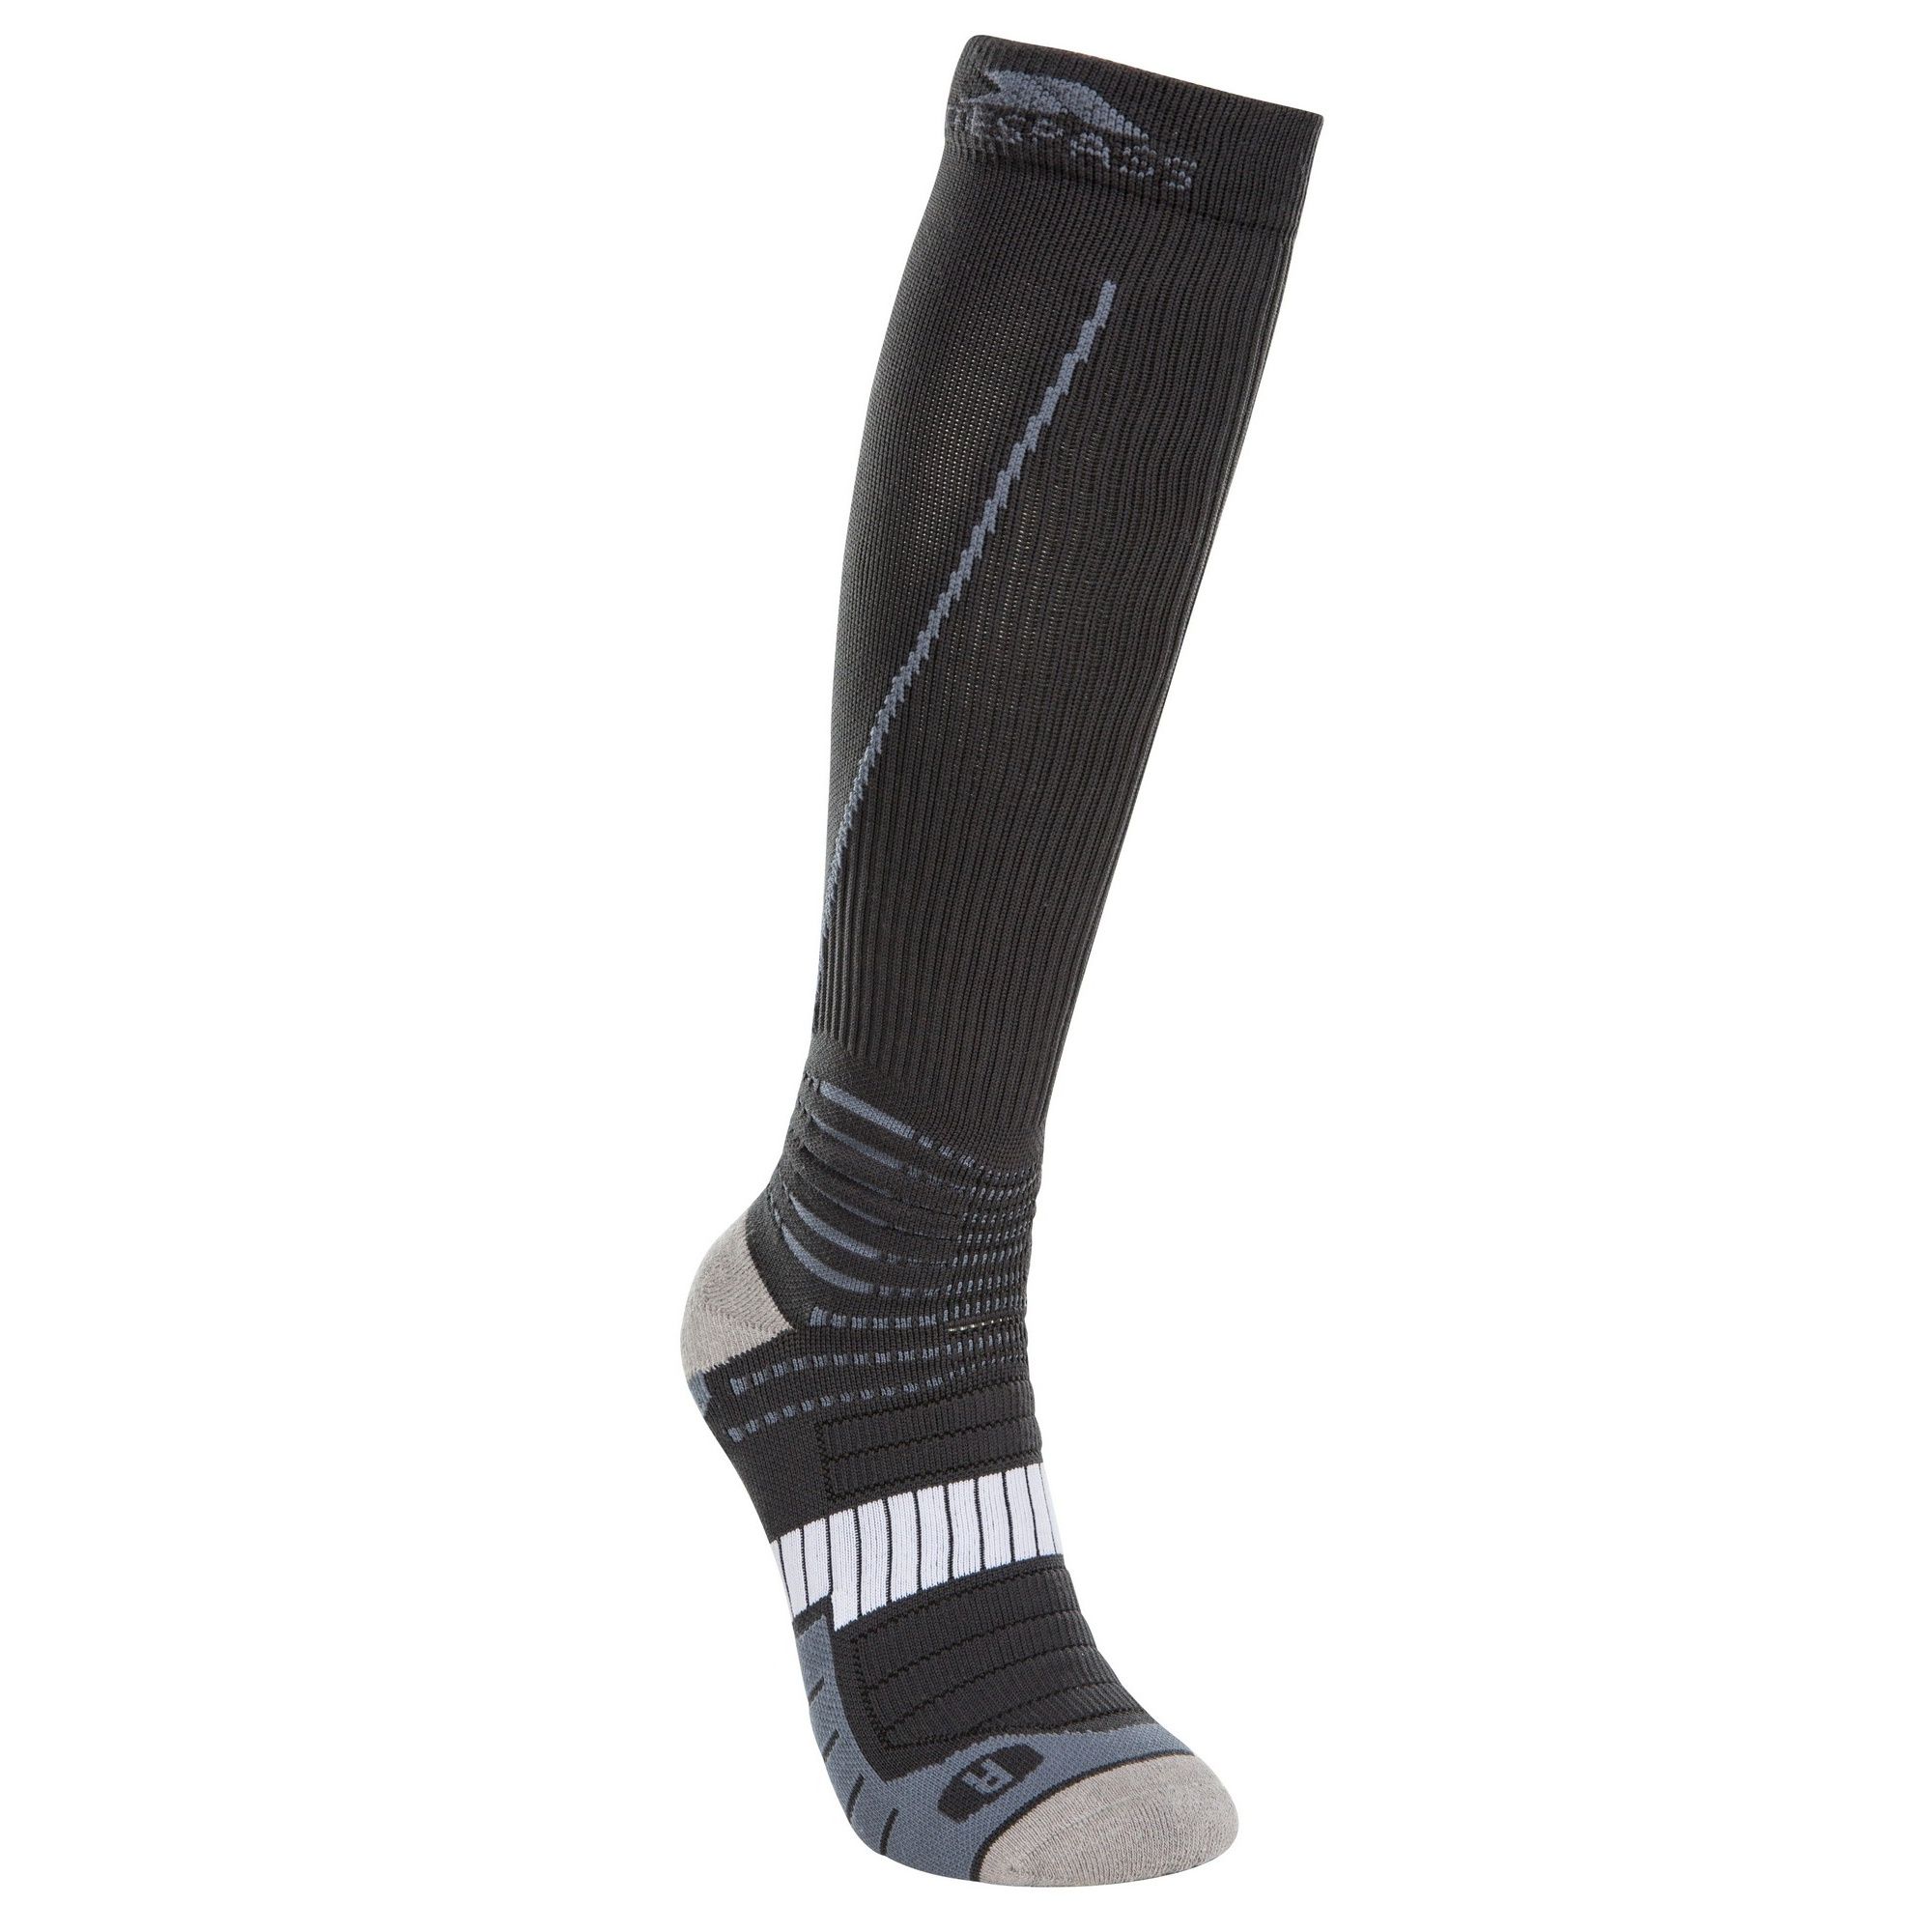 Anatomical fit. Non-binding, comfort band construction. Graduated compression level of 20-25 mmHg. Improved blood flow and circulation. Sculpted terry cushioned sole. 95% Nylon, 5% Spandex.